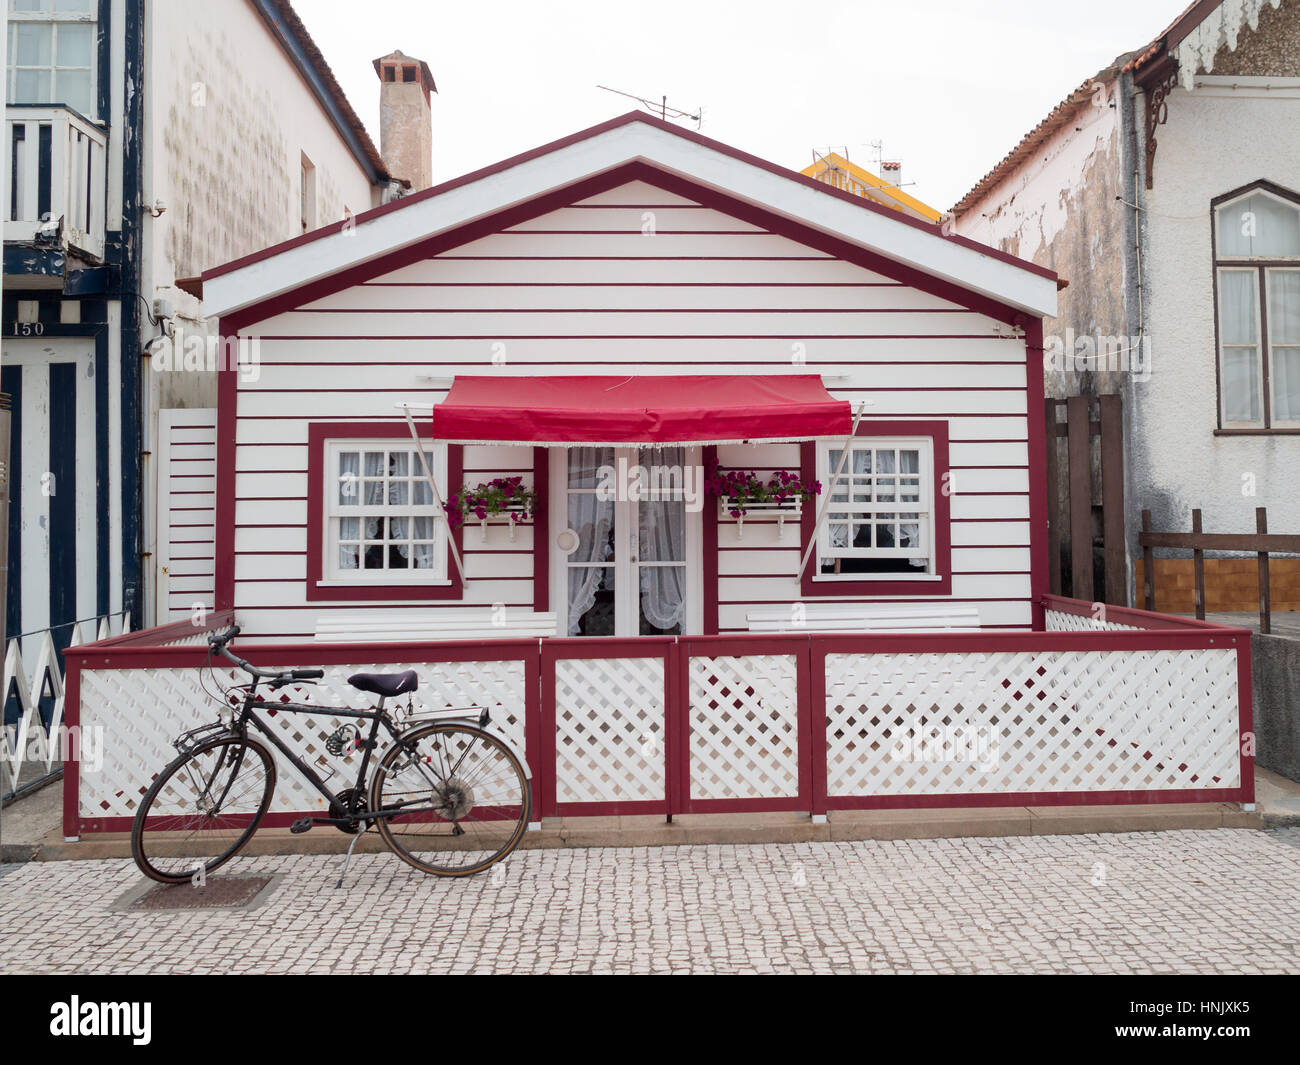 Costa Nova typical stripped houses Stock Photo